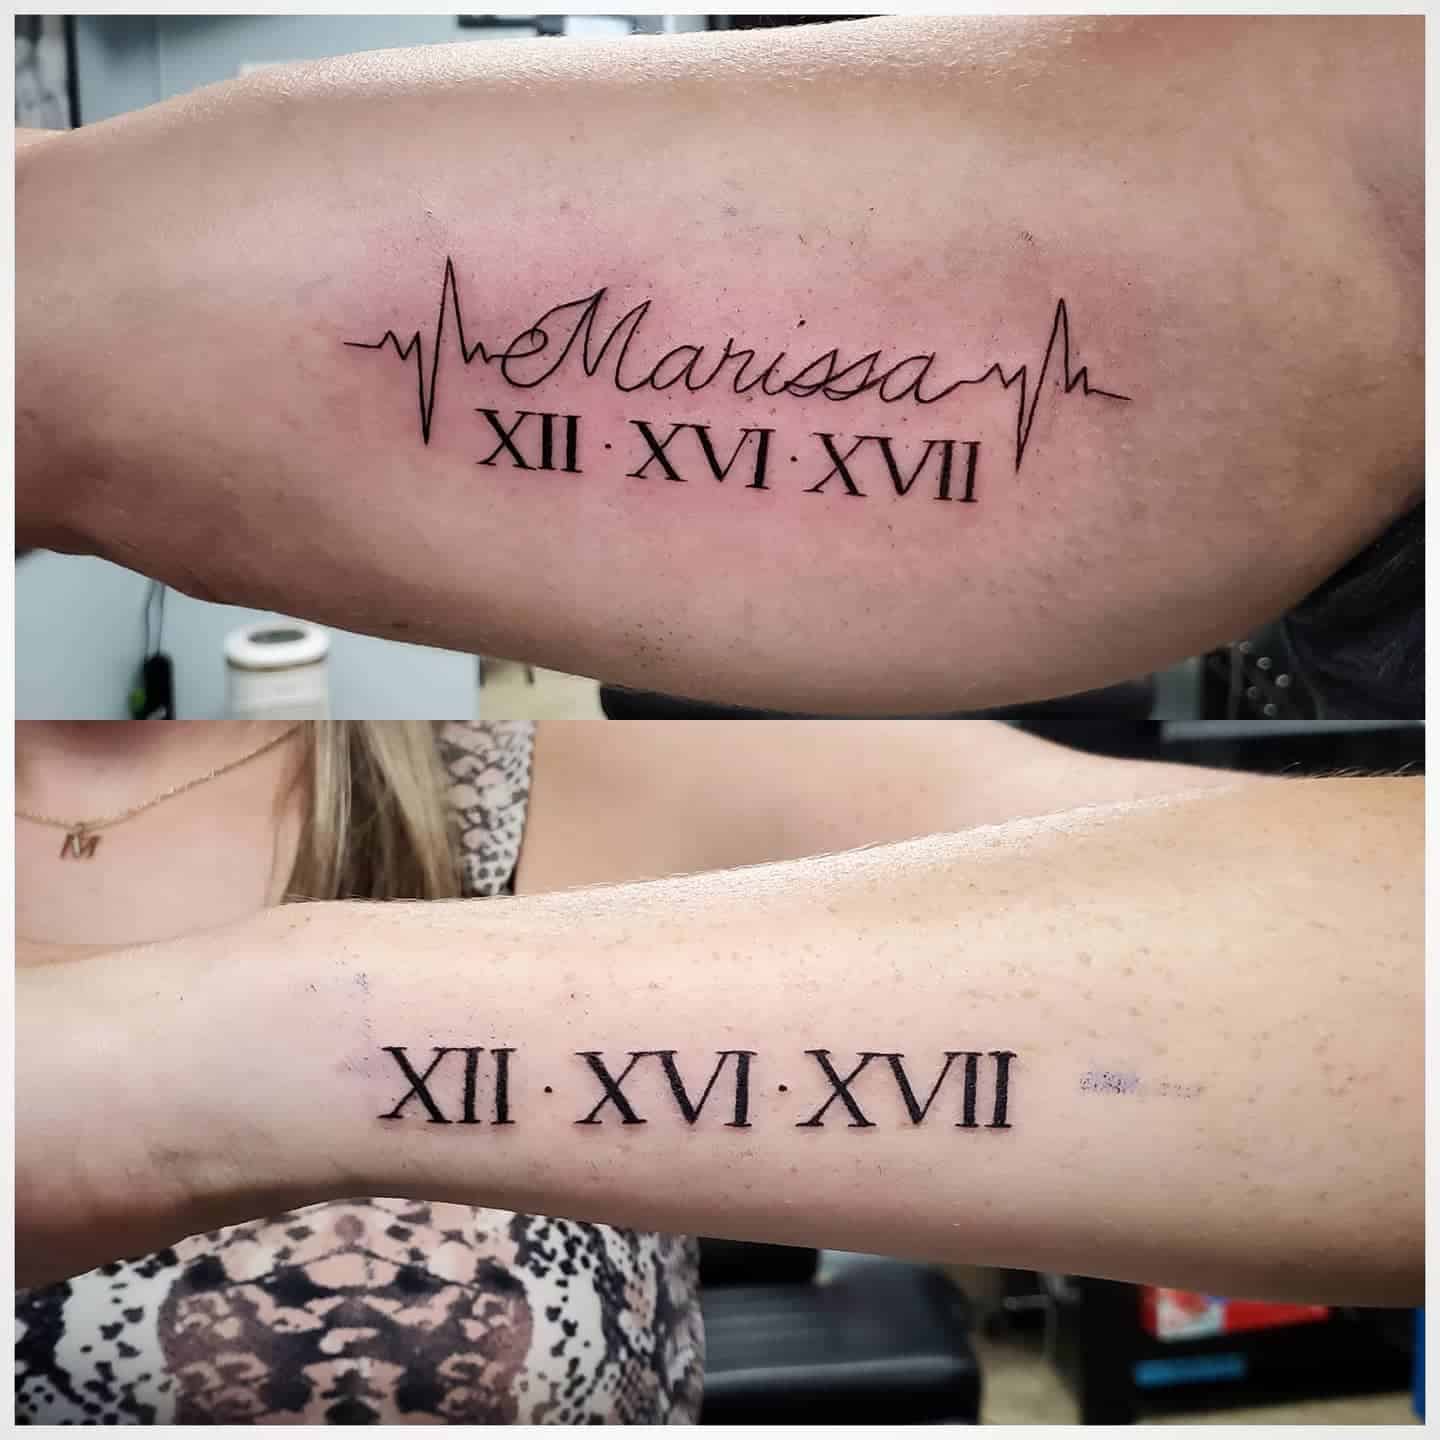 Date? to tattoos are harder 